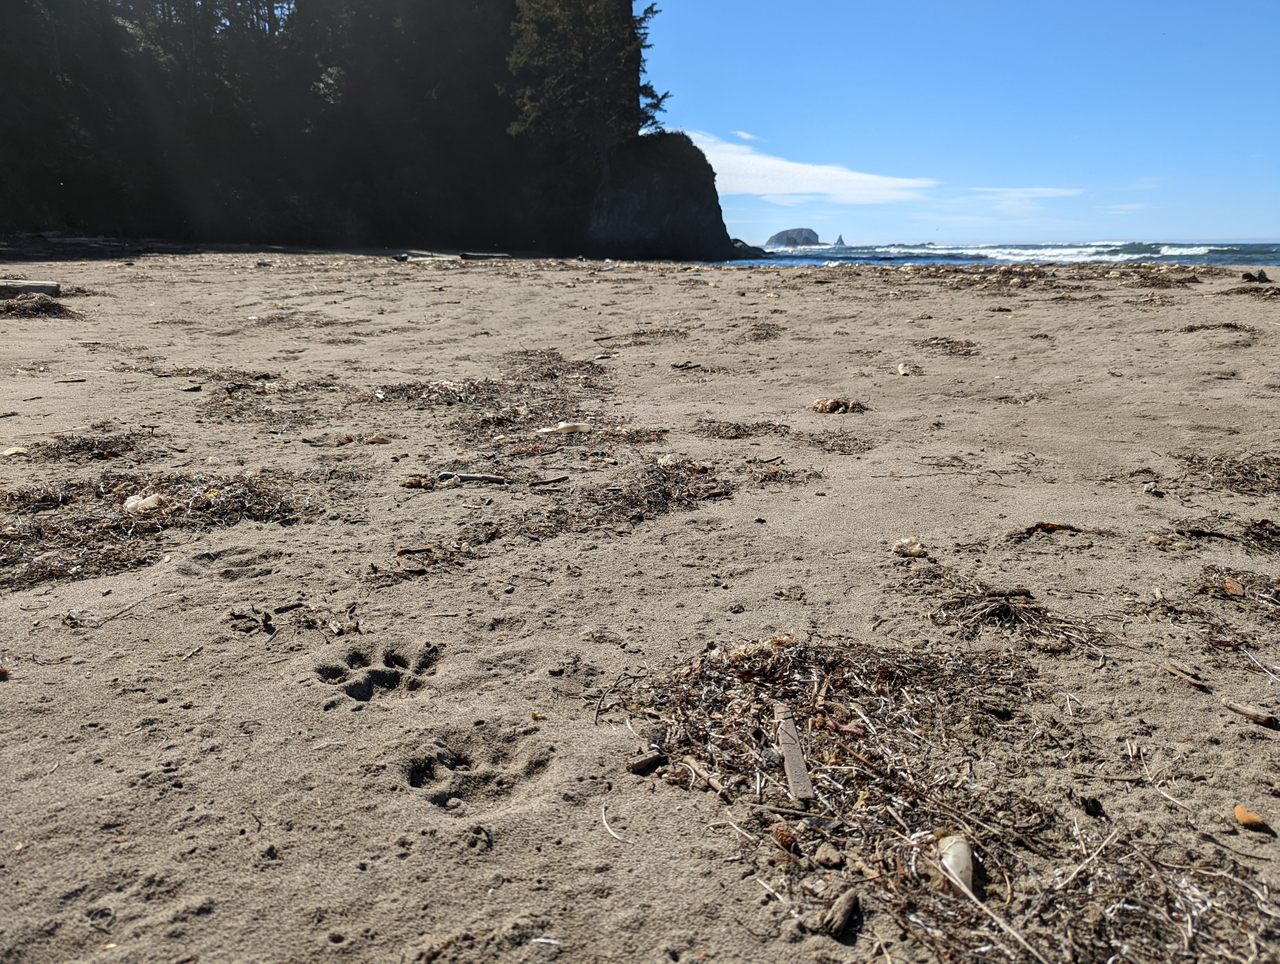 Cougar tracks, or pugmarks, on an Olympic Peninsula beach.